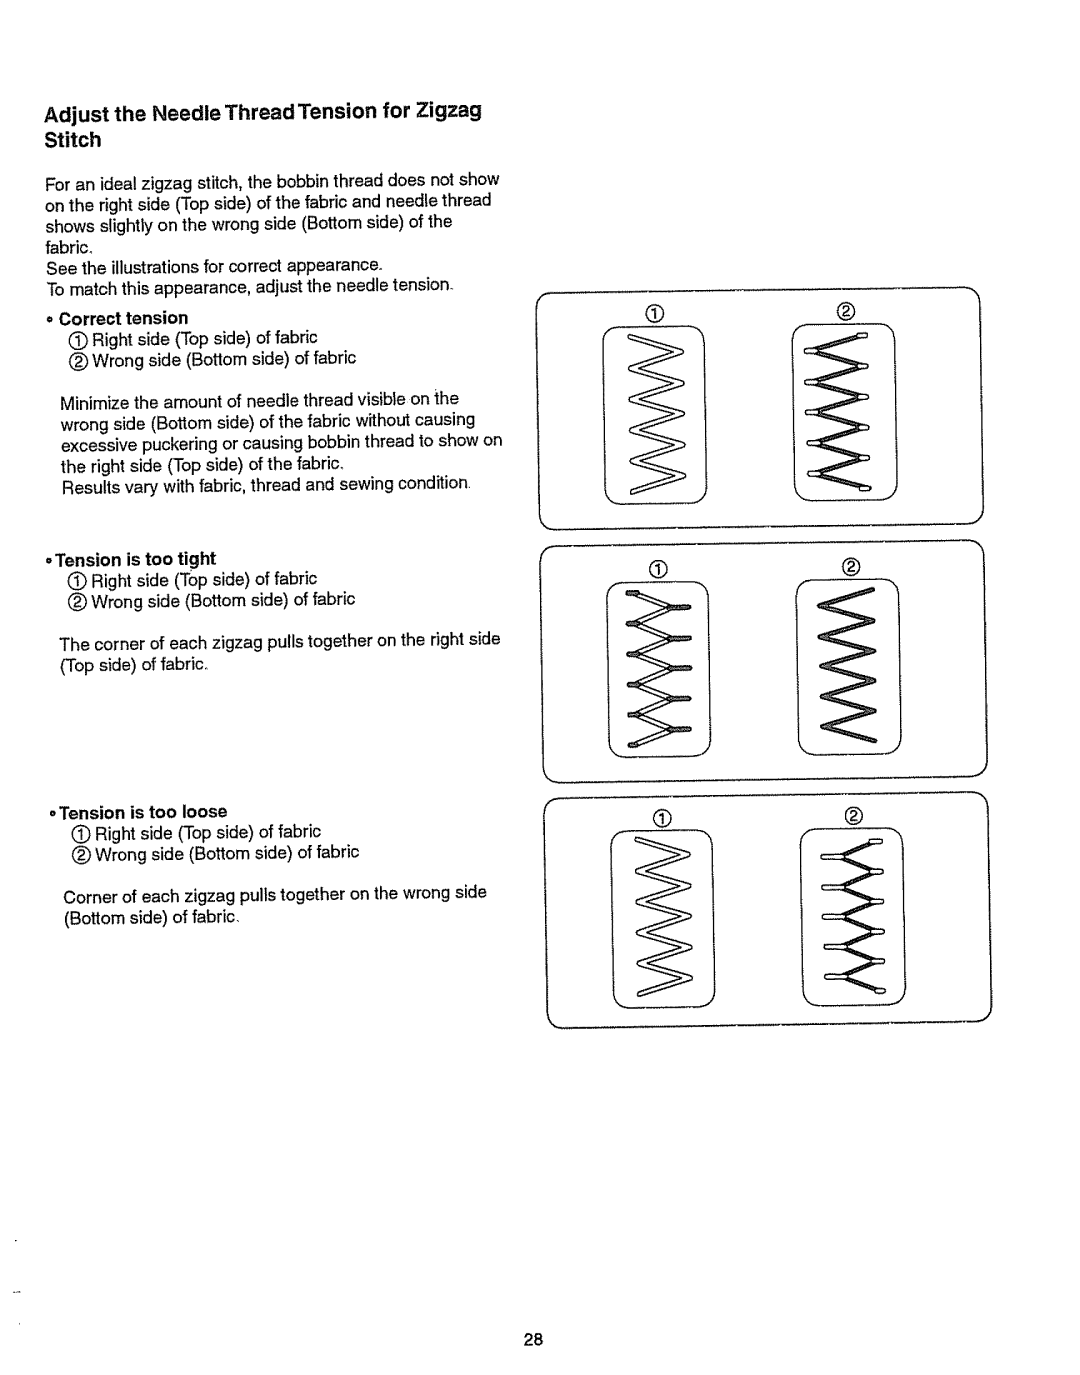 Kenmore 385.151082 owner manual Adjust the Needle Thread Tension for Zigzag Stitch, OTension is too loose 